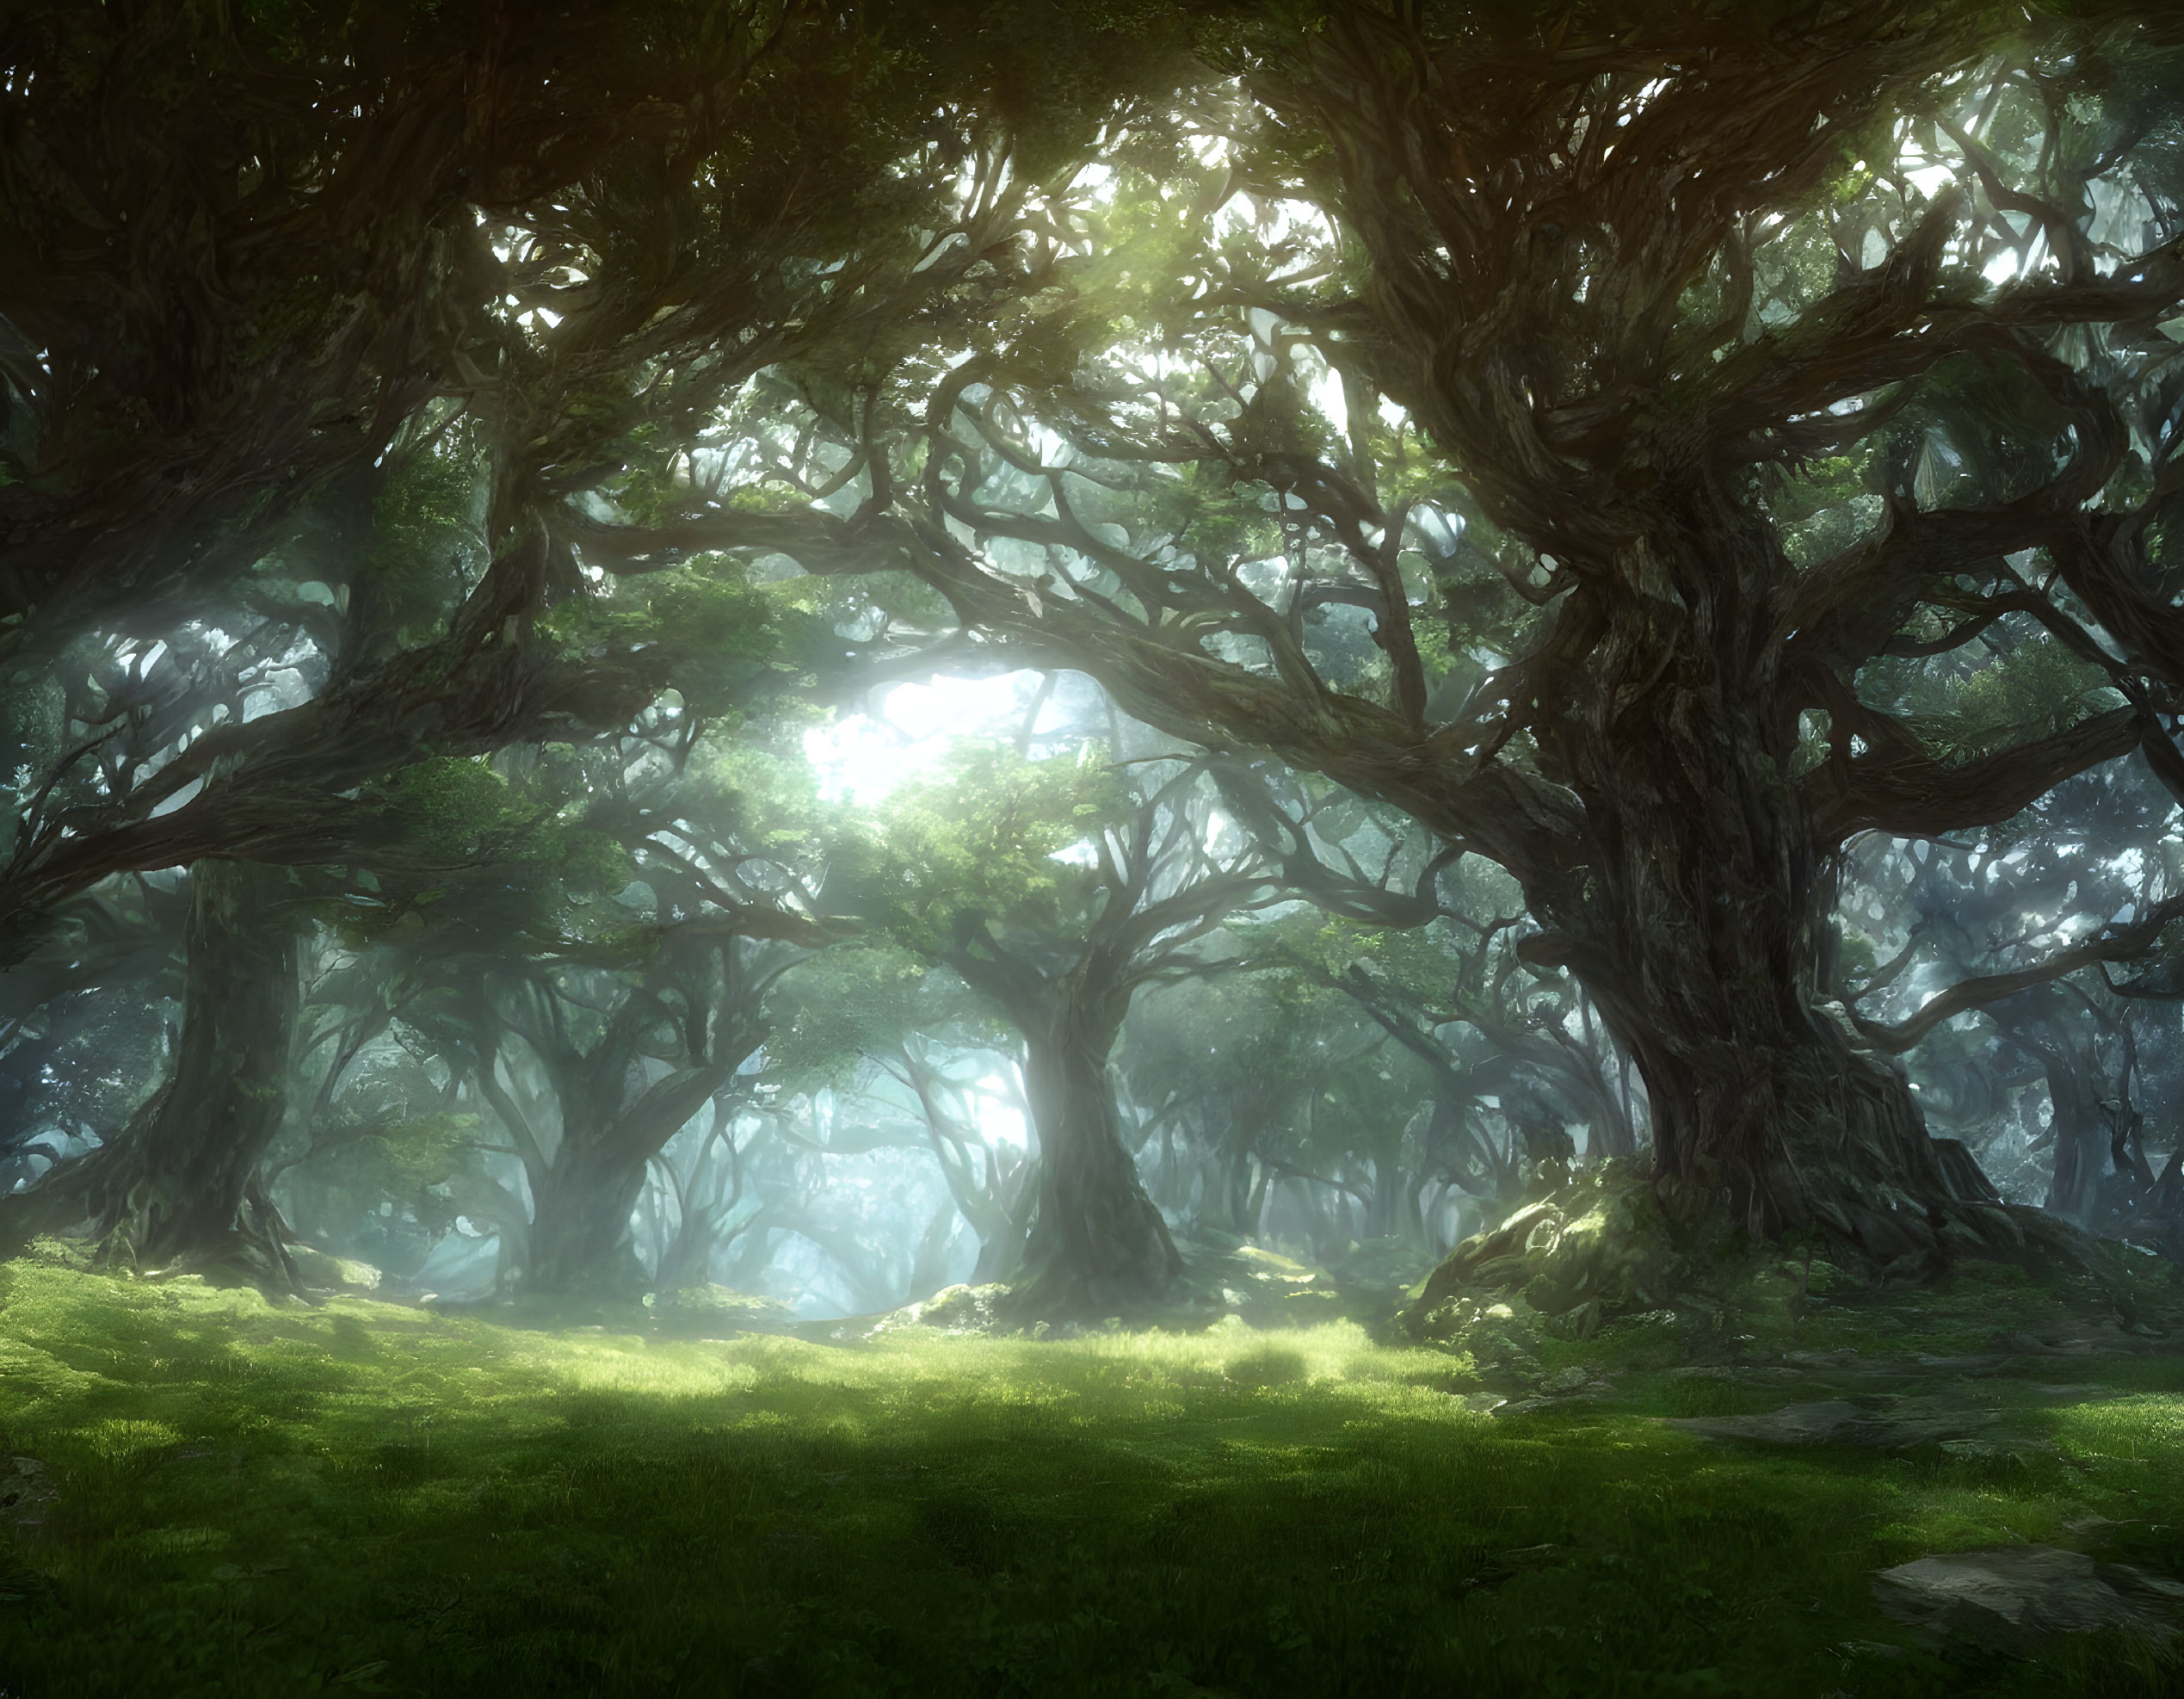 Sunlit forest clearing with ancient trees and mossy ground in ethereal mist